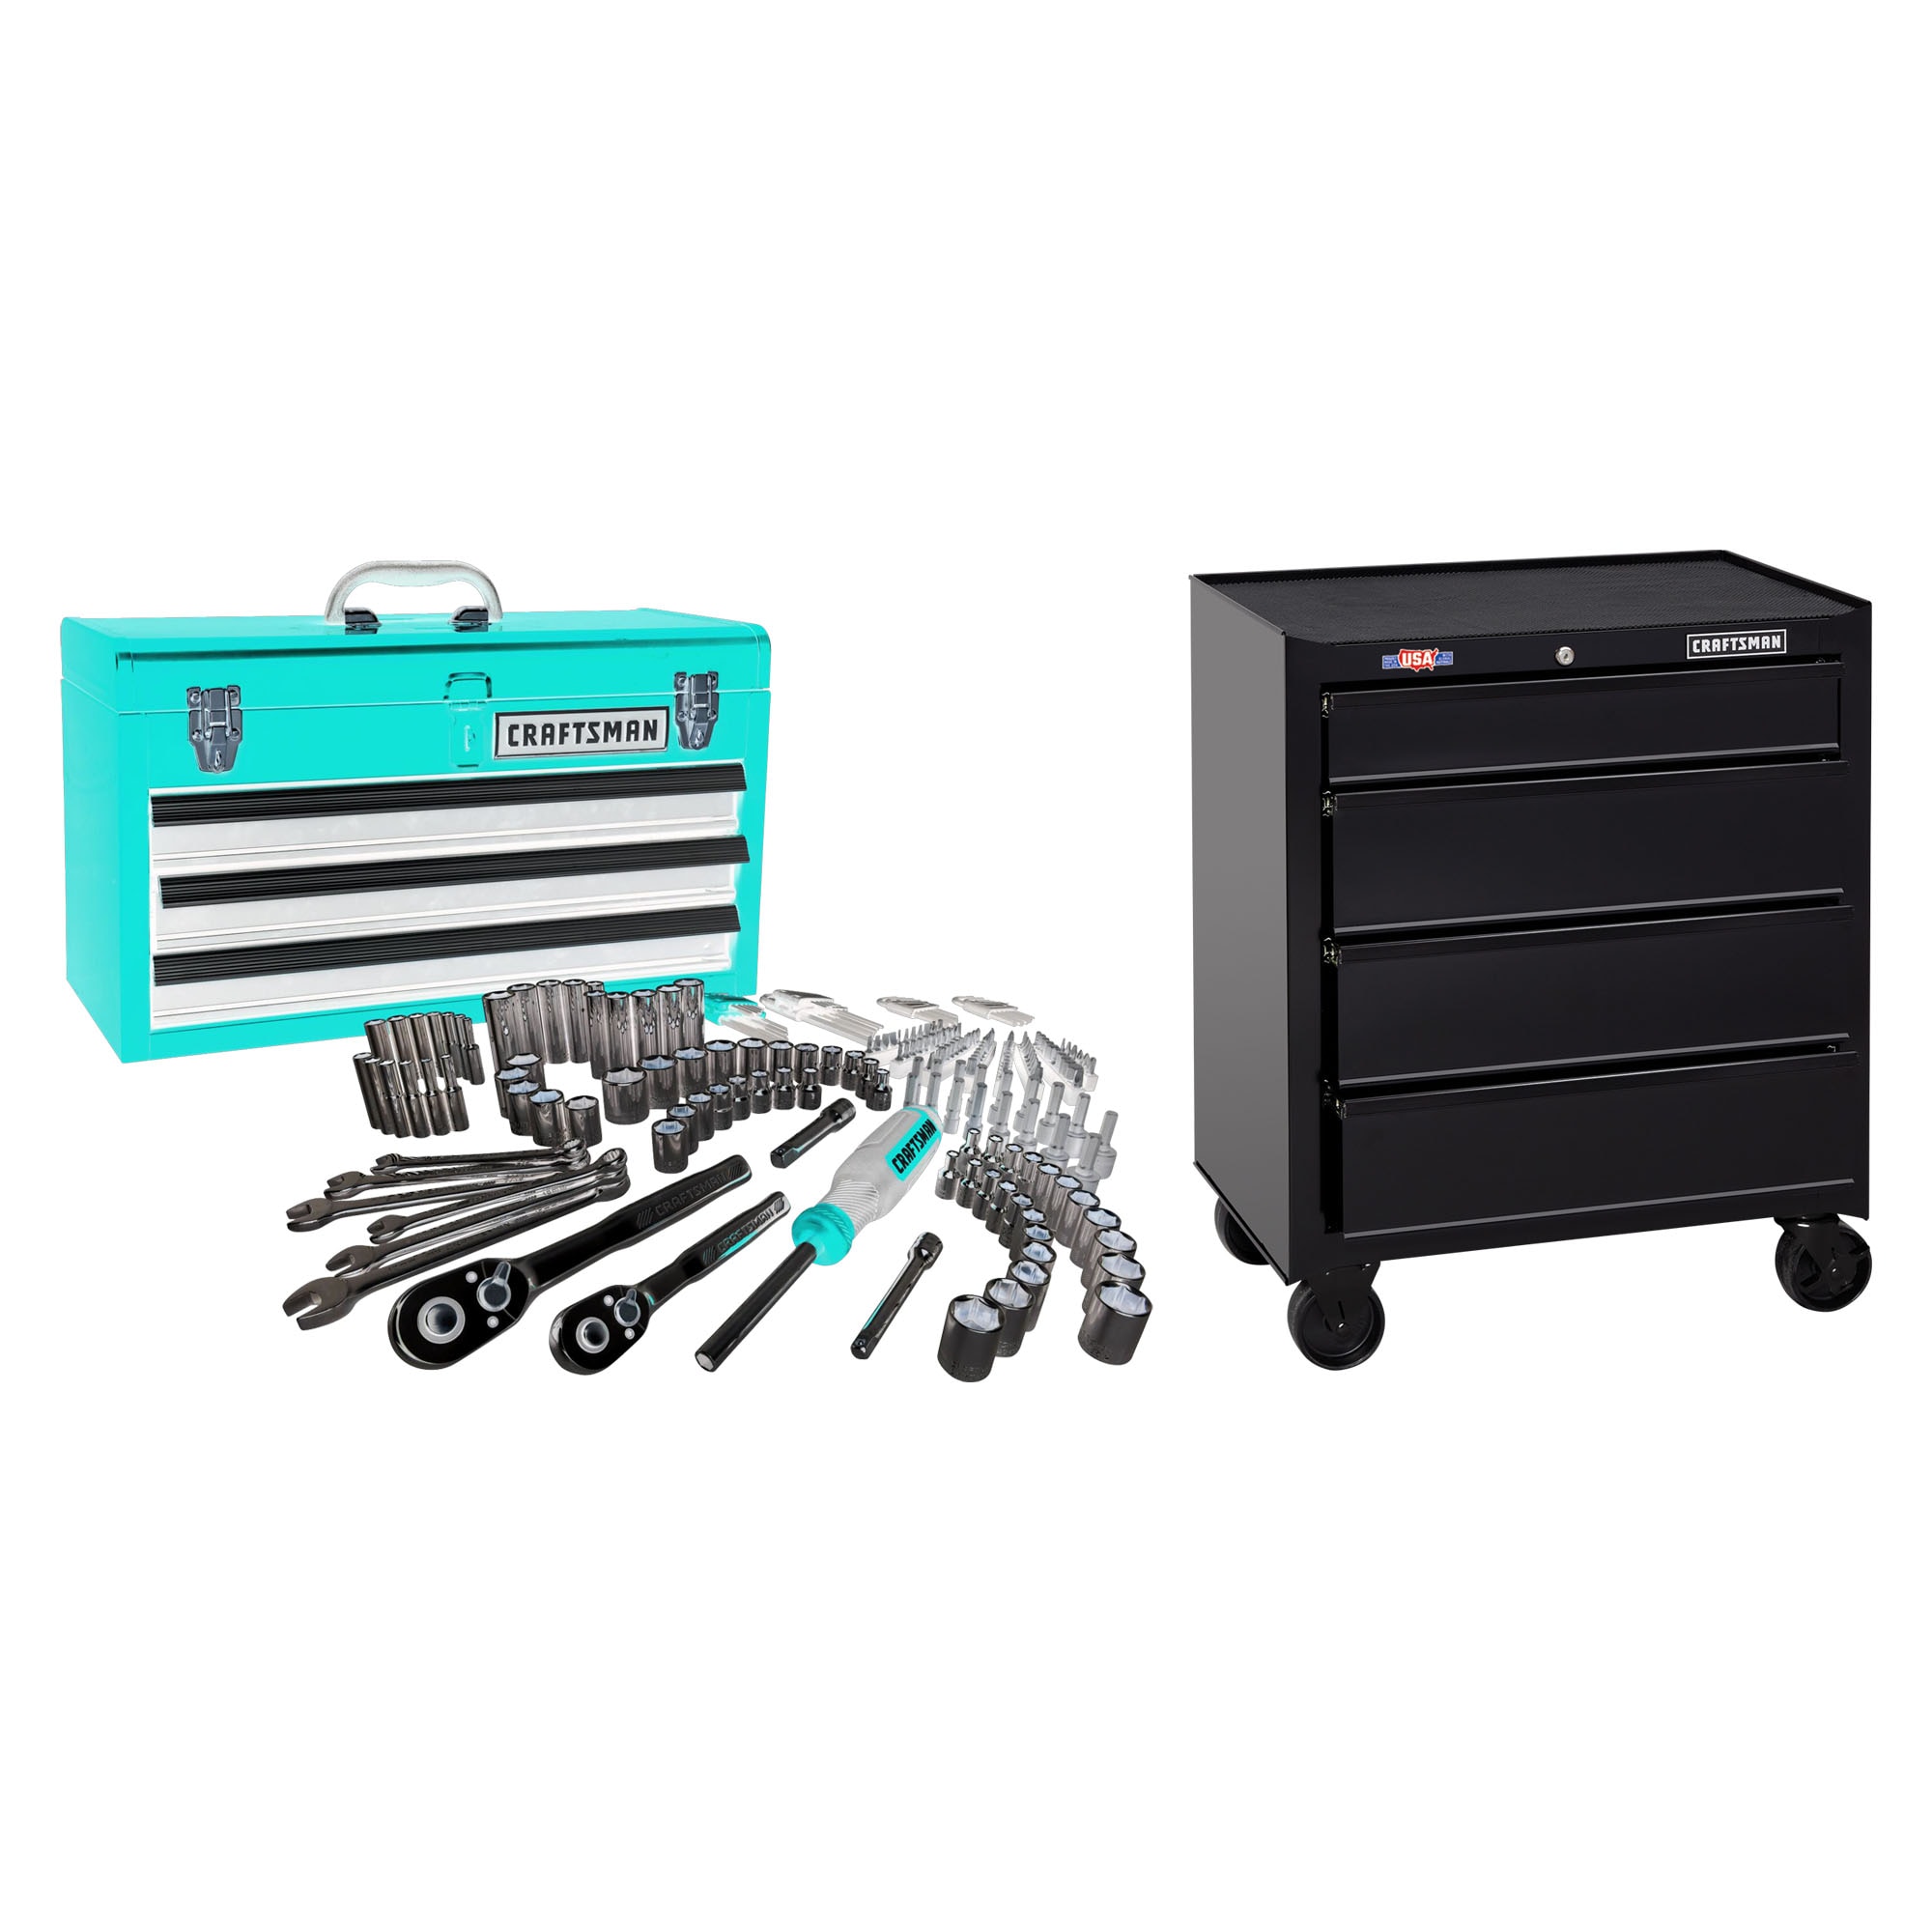 CRAFTSMAN 1000 Series 26.5-in W x 32.5-in H 4-Drawer Steel Rolling Tool Cabinet (Black) & 224-Piece Standard (SAE) and Metric Combination Polished